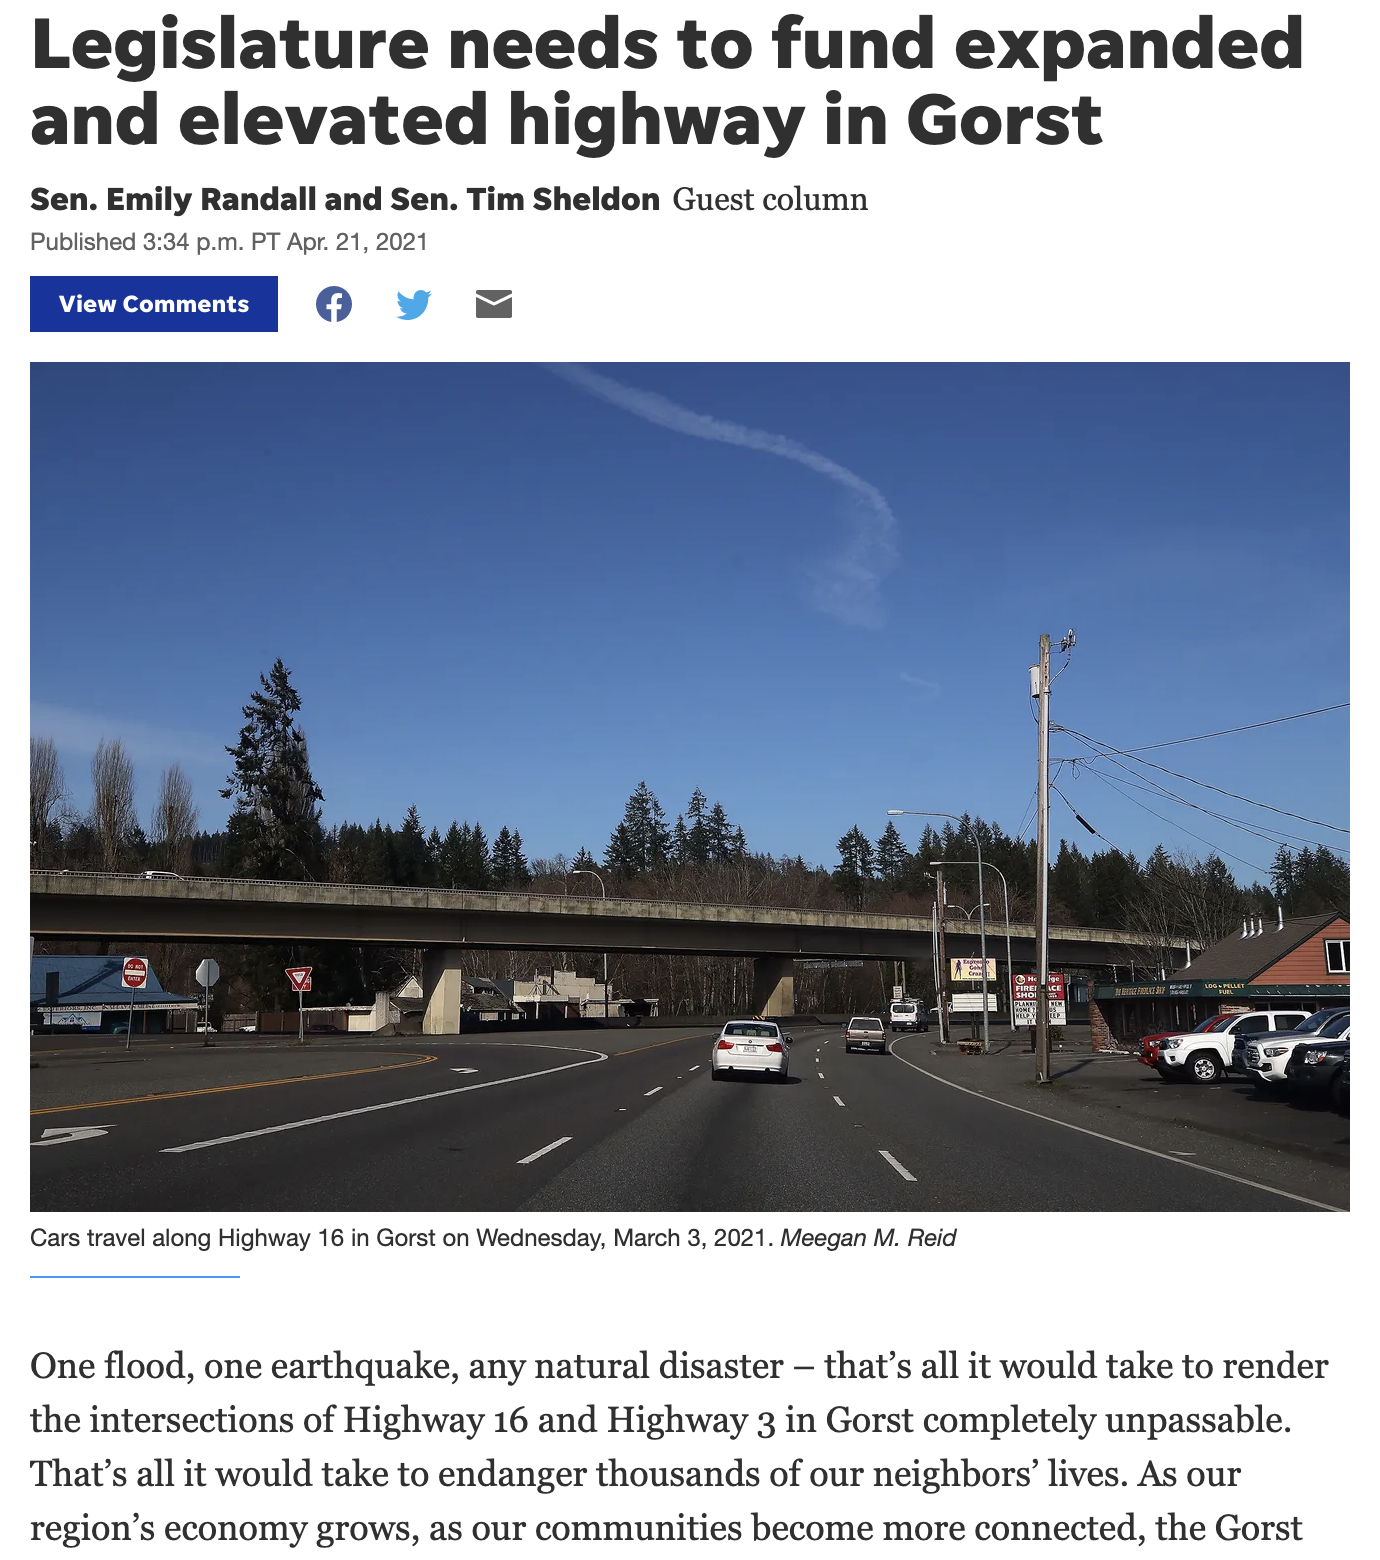 Kitsap Sun - "Legislature needs to fund expanded and elevated highway in Gorst"